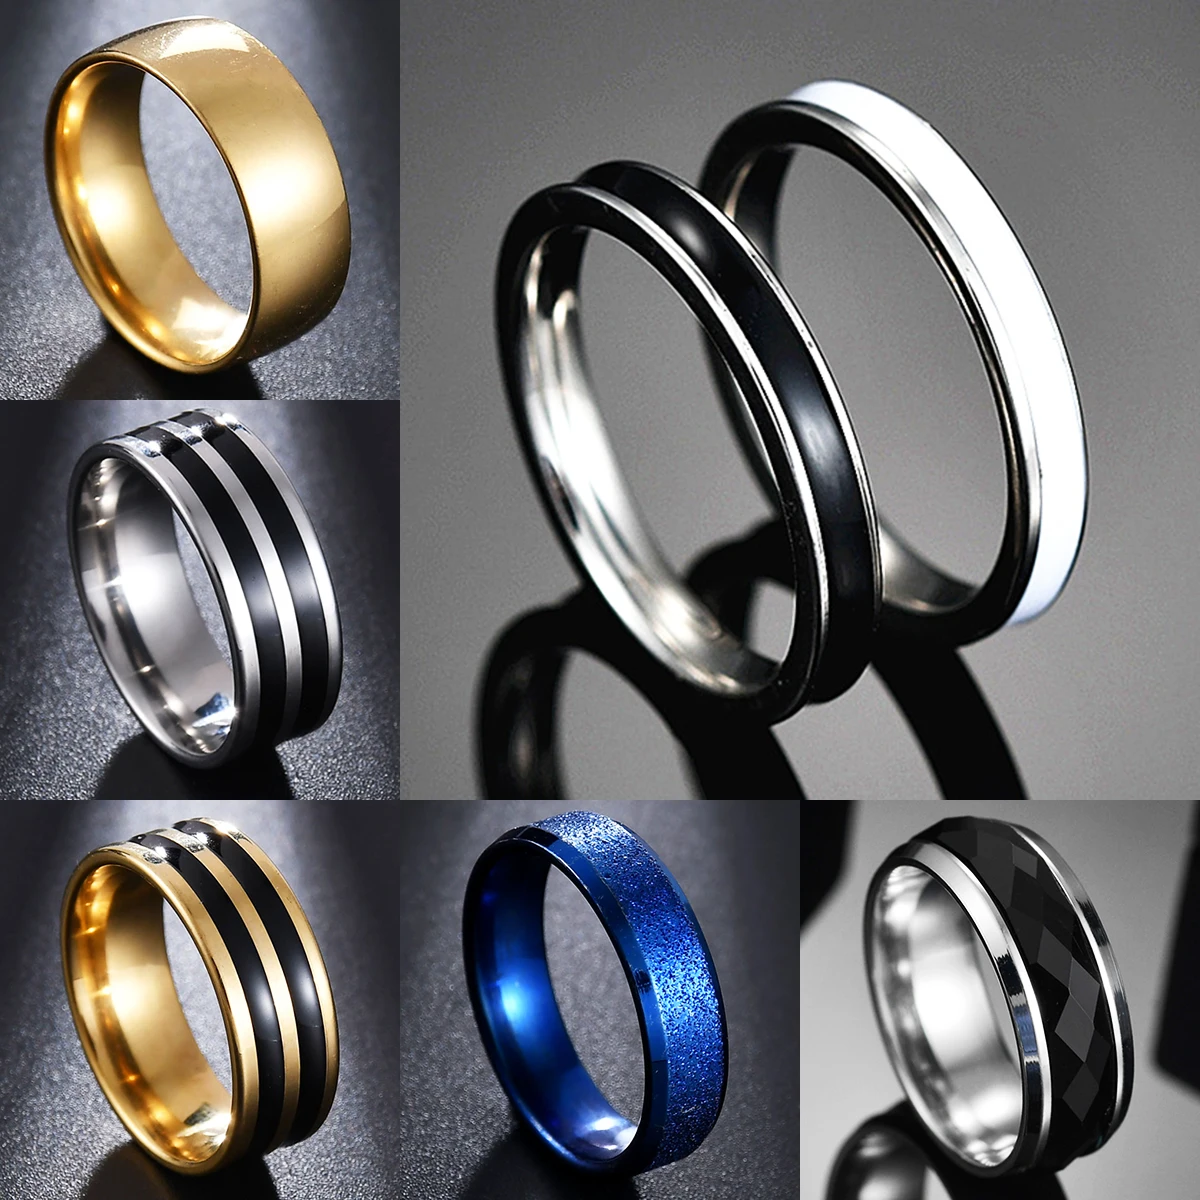 

New Arrival Black White Color Lover Couple Promise Wedding Rings for Men and Women Anniversary Jewerly Gift